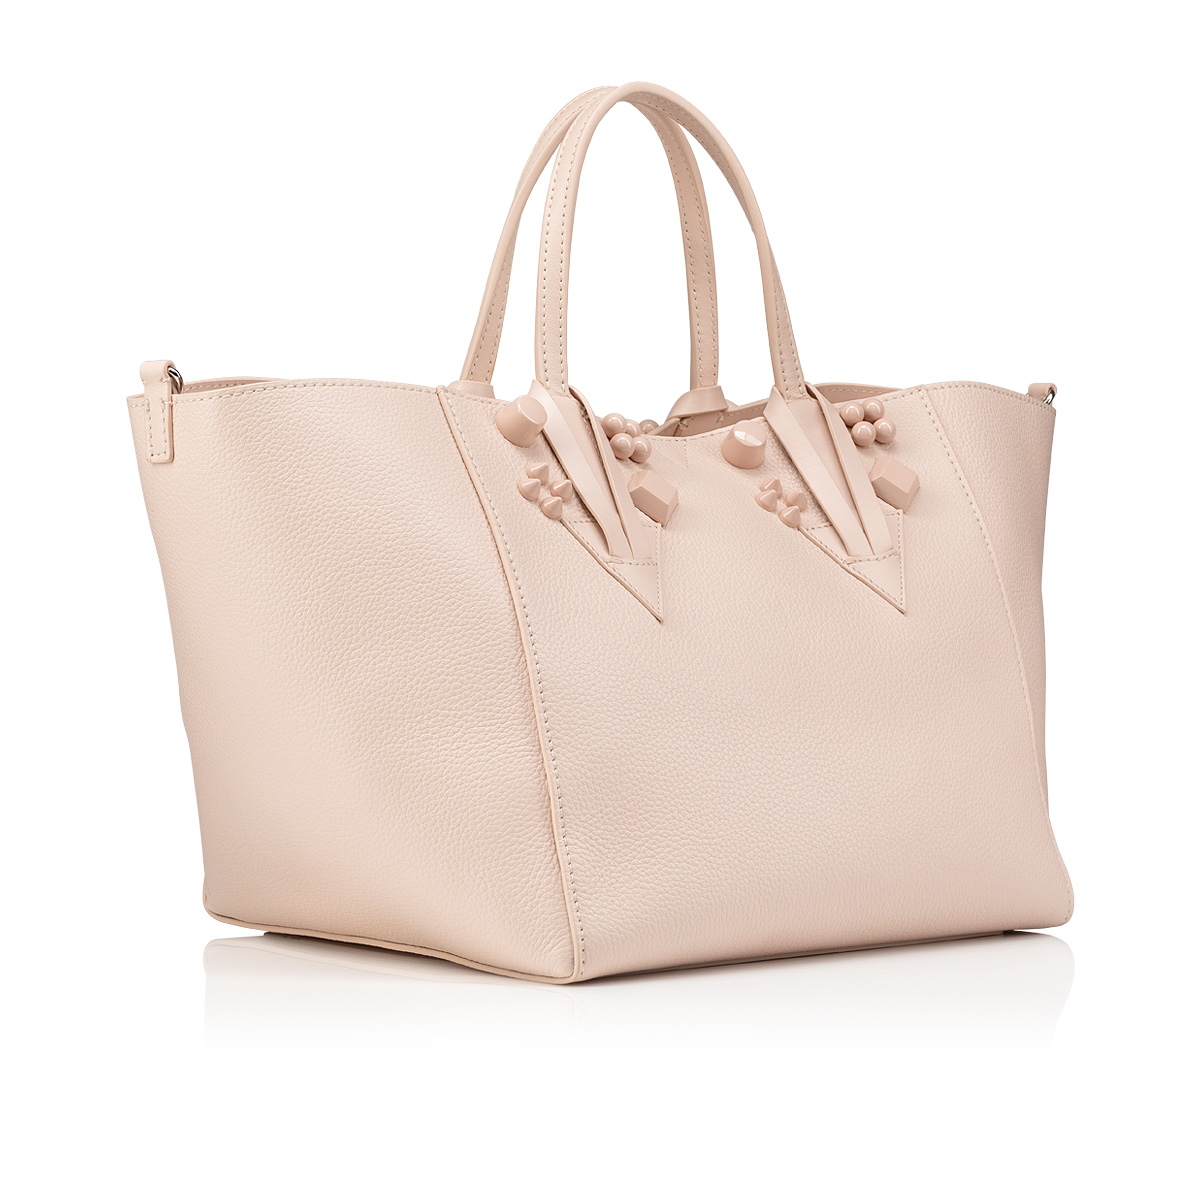 Cabachic Tote Bag by Christian Louboutin. – Boyds